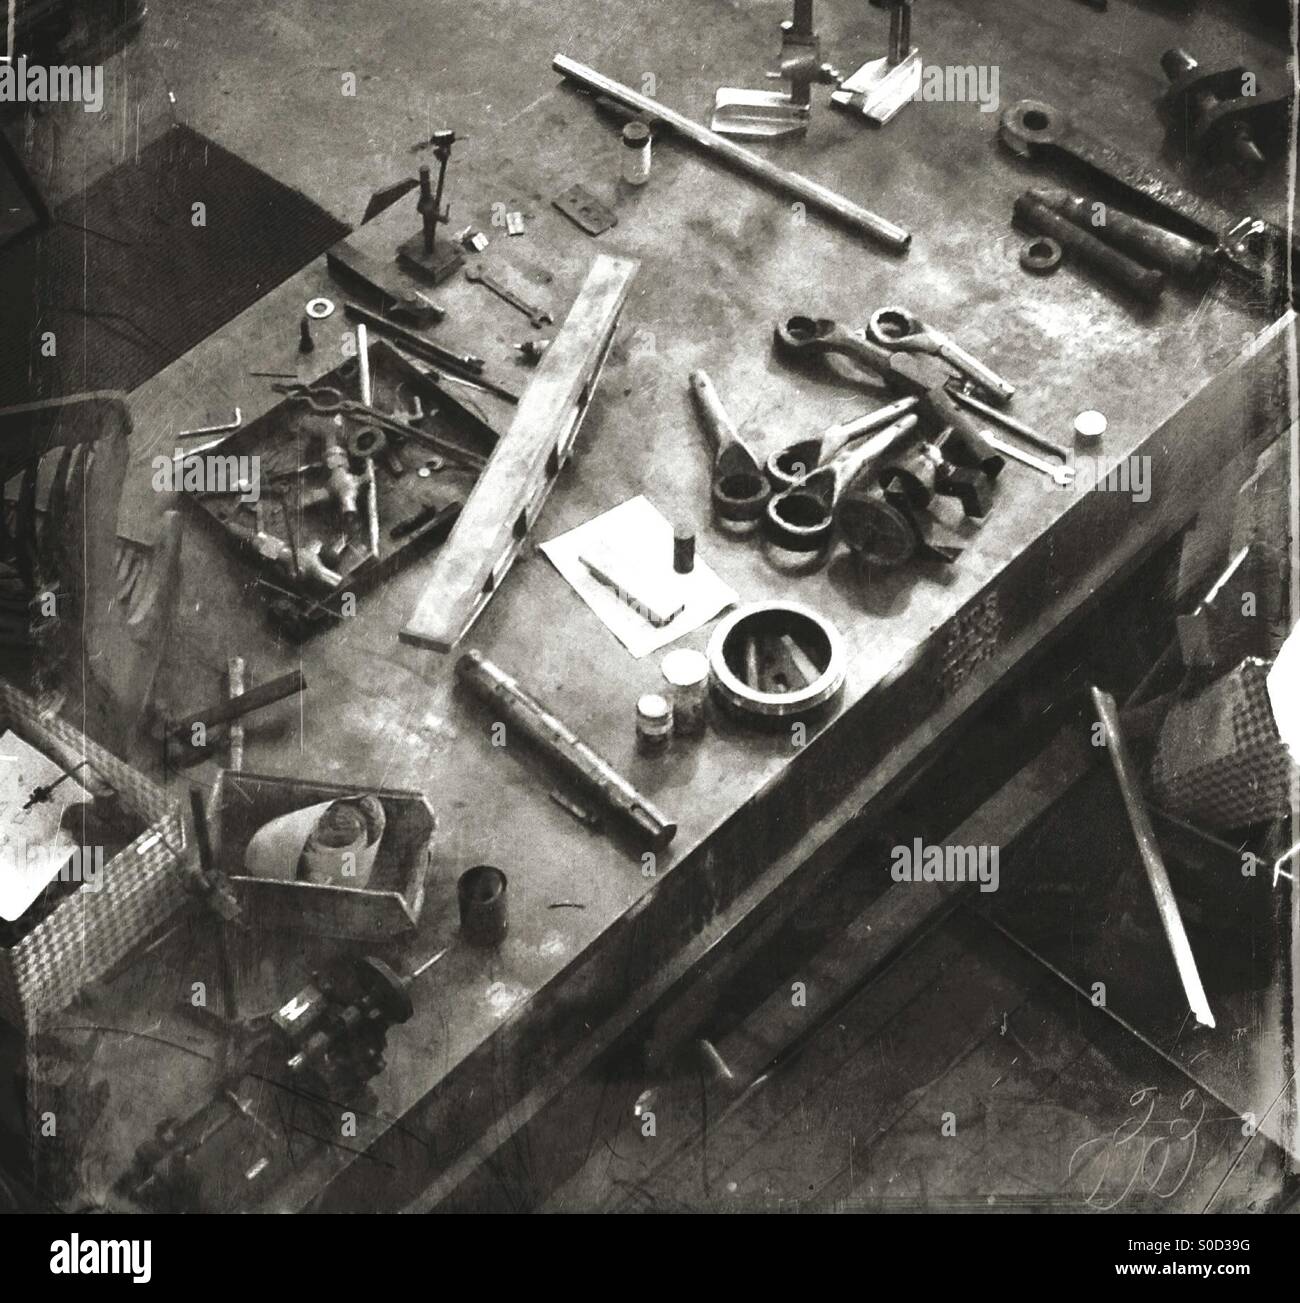 Aerial view of a workman's tool bench Stock Photo